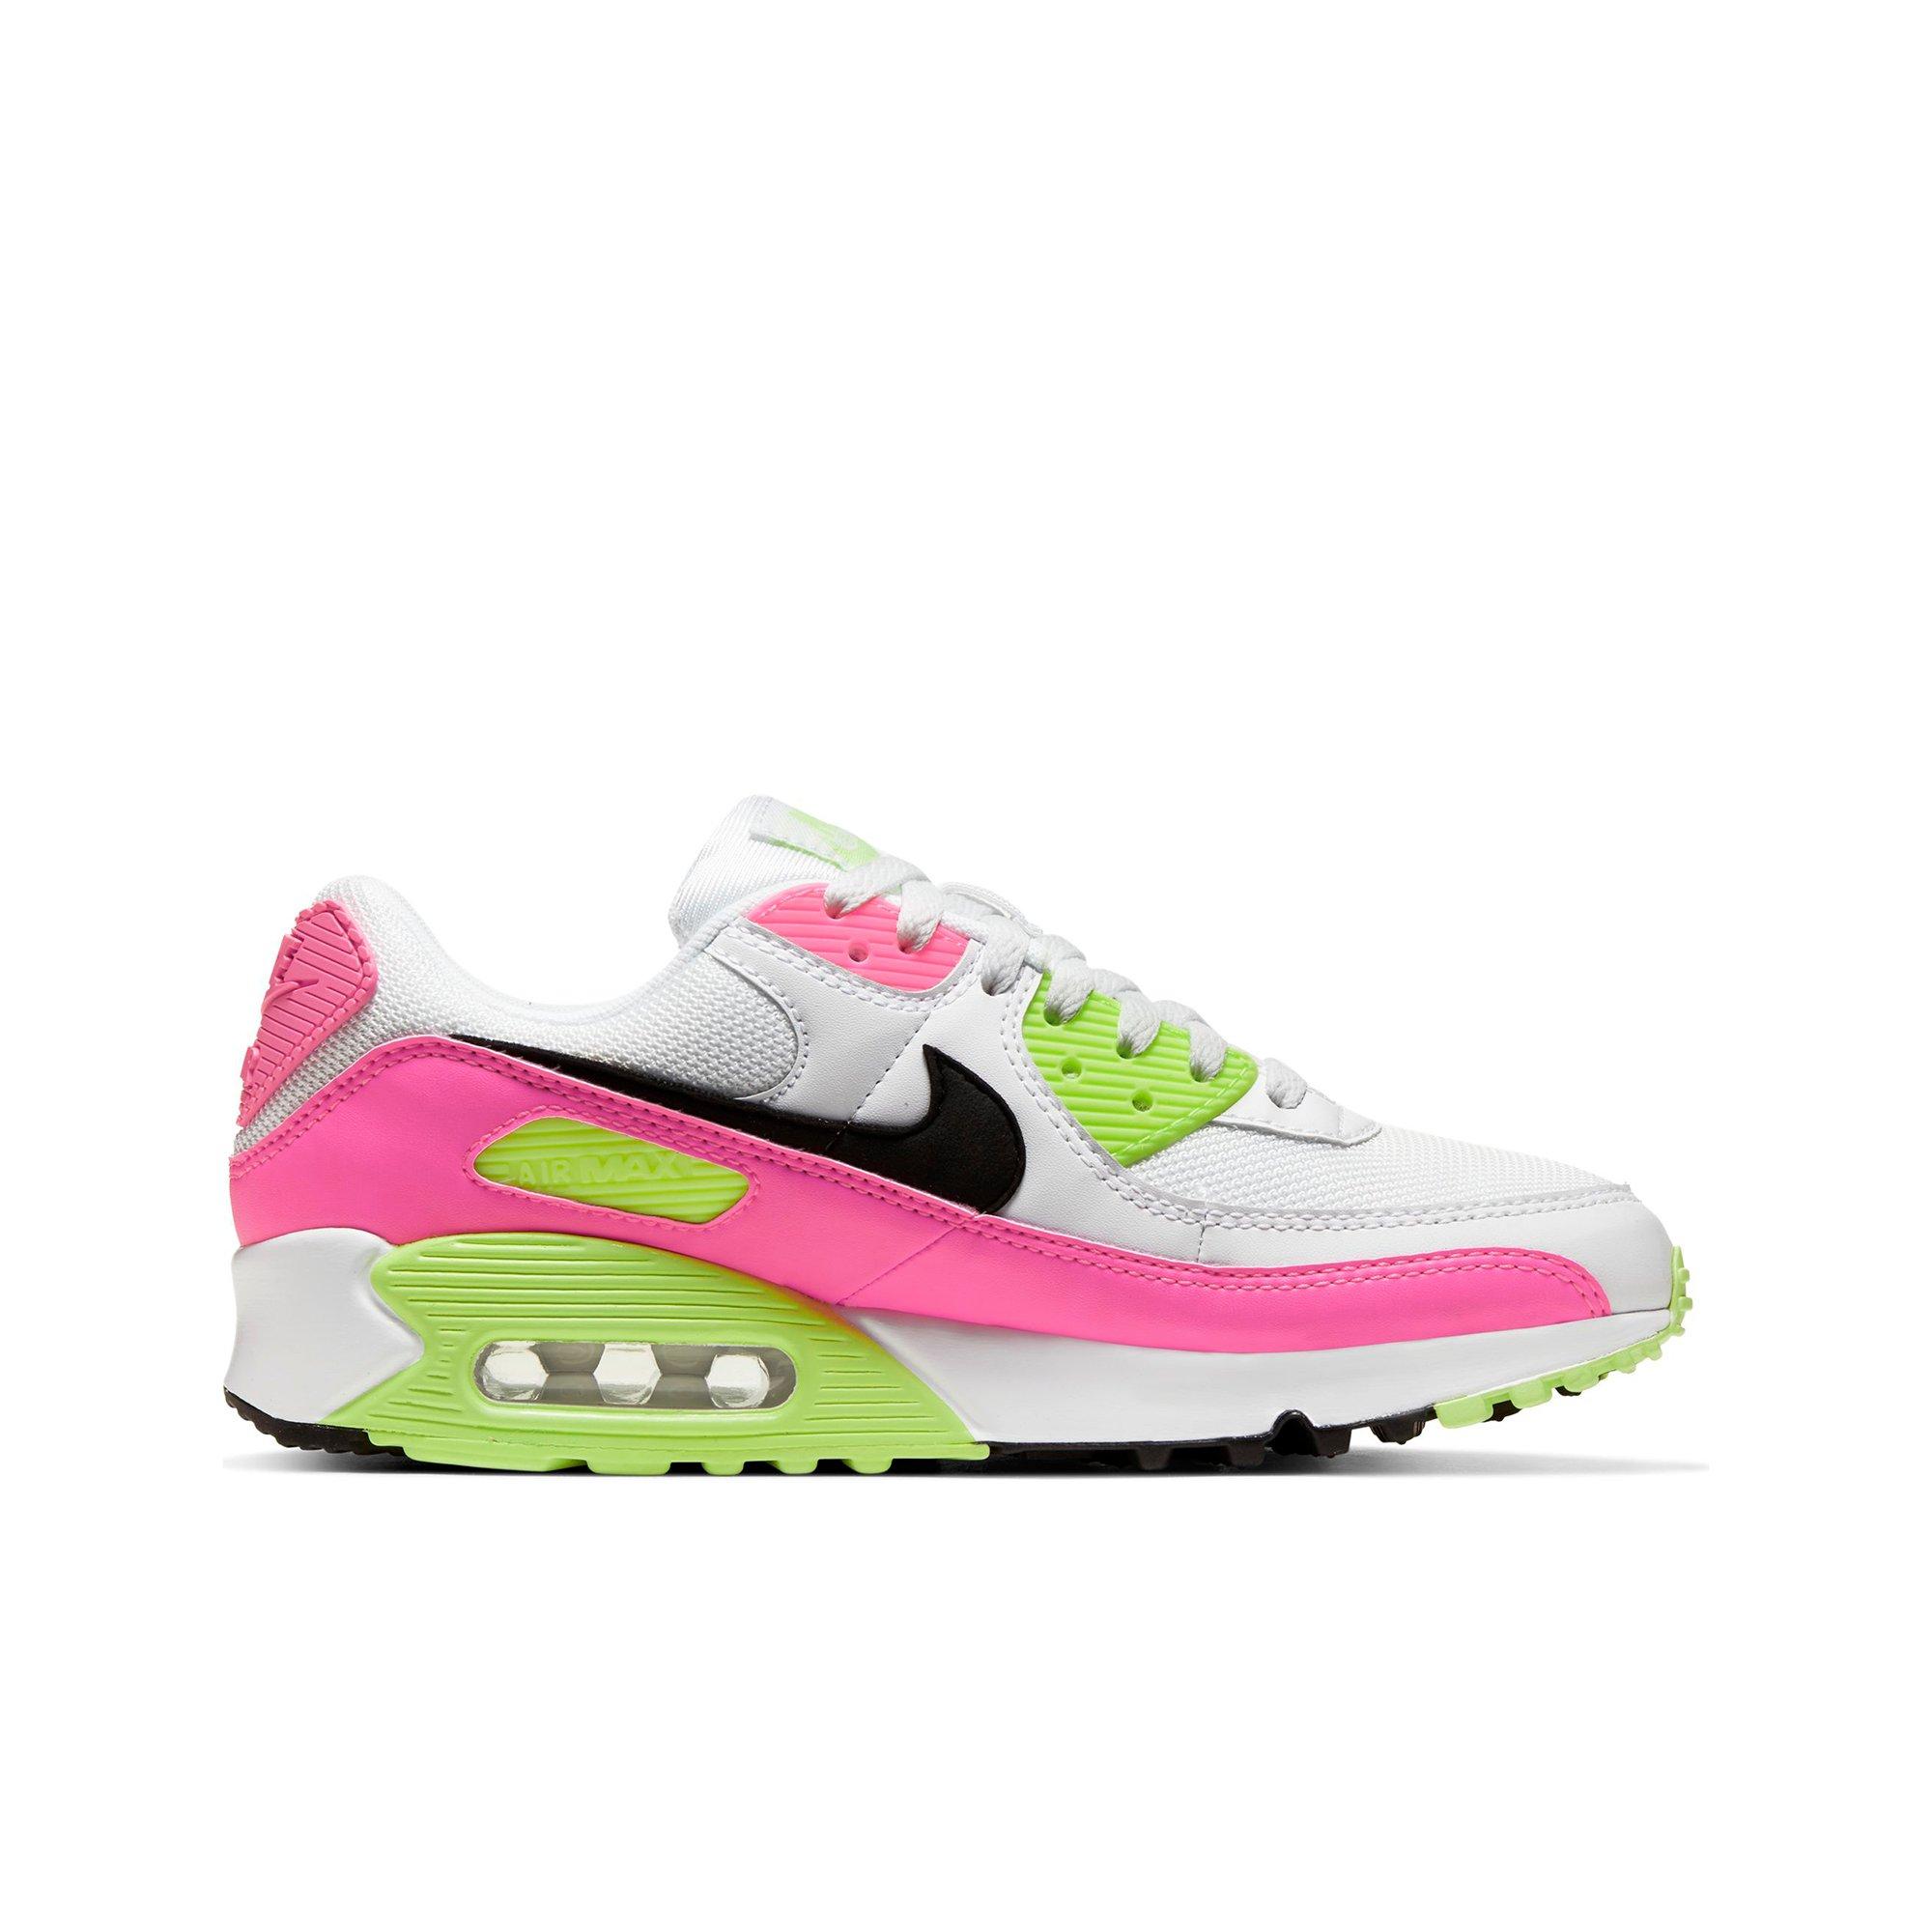 nike women's shoes pink and green